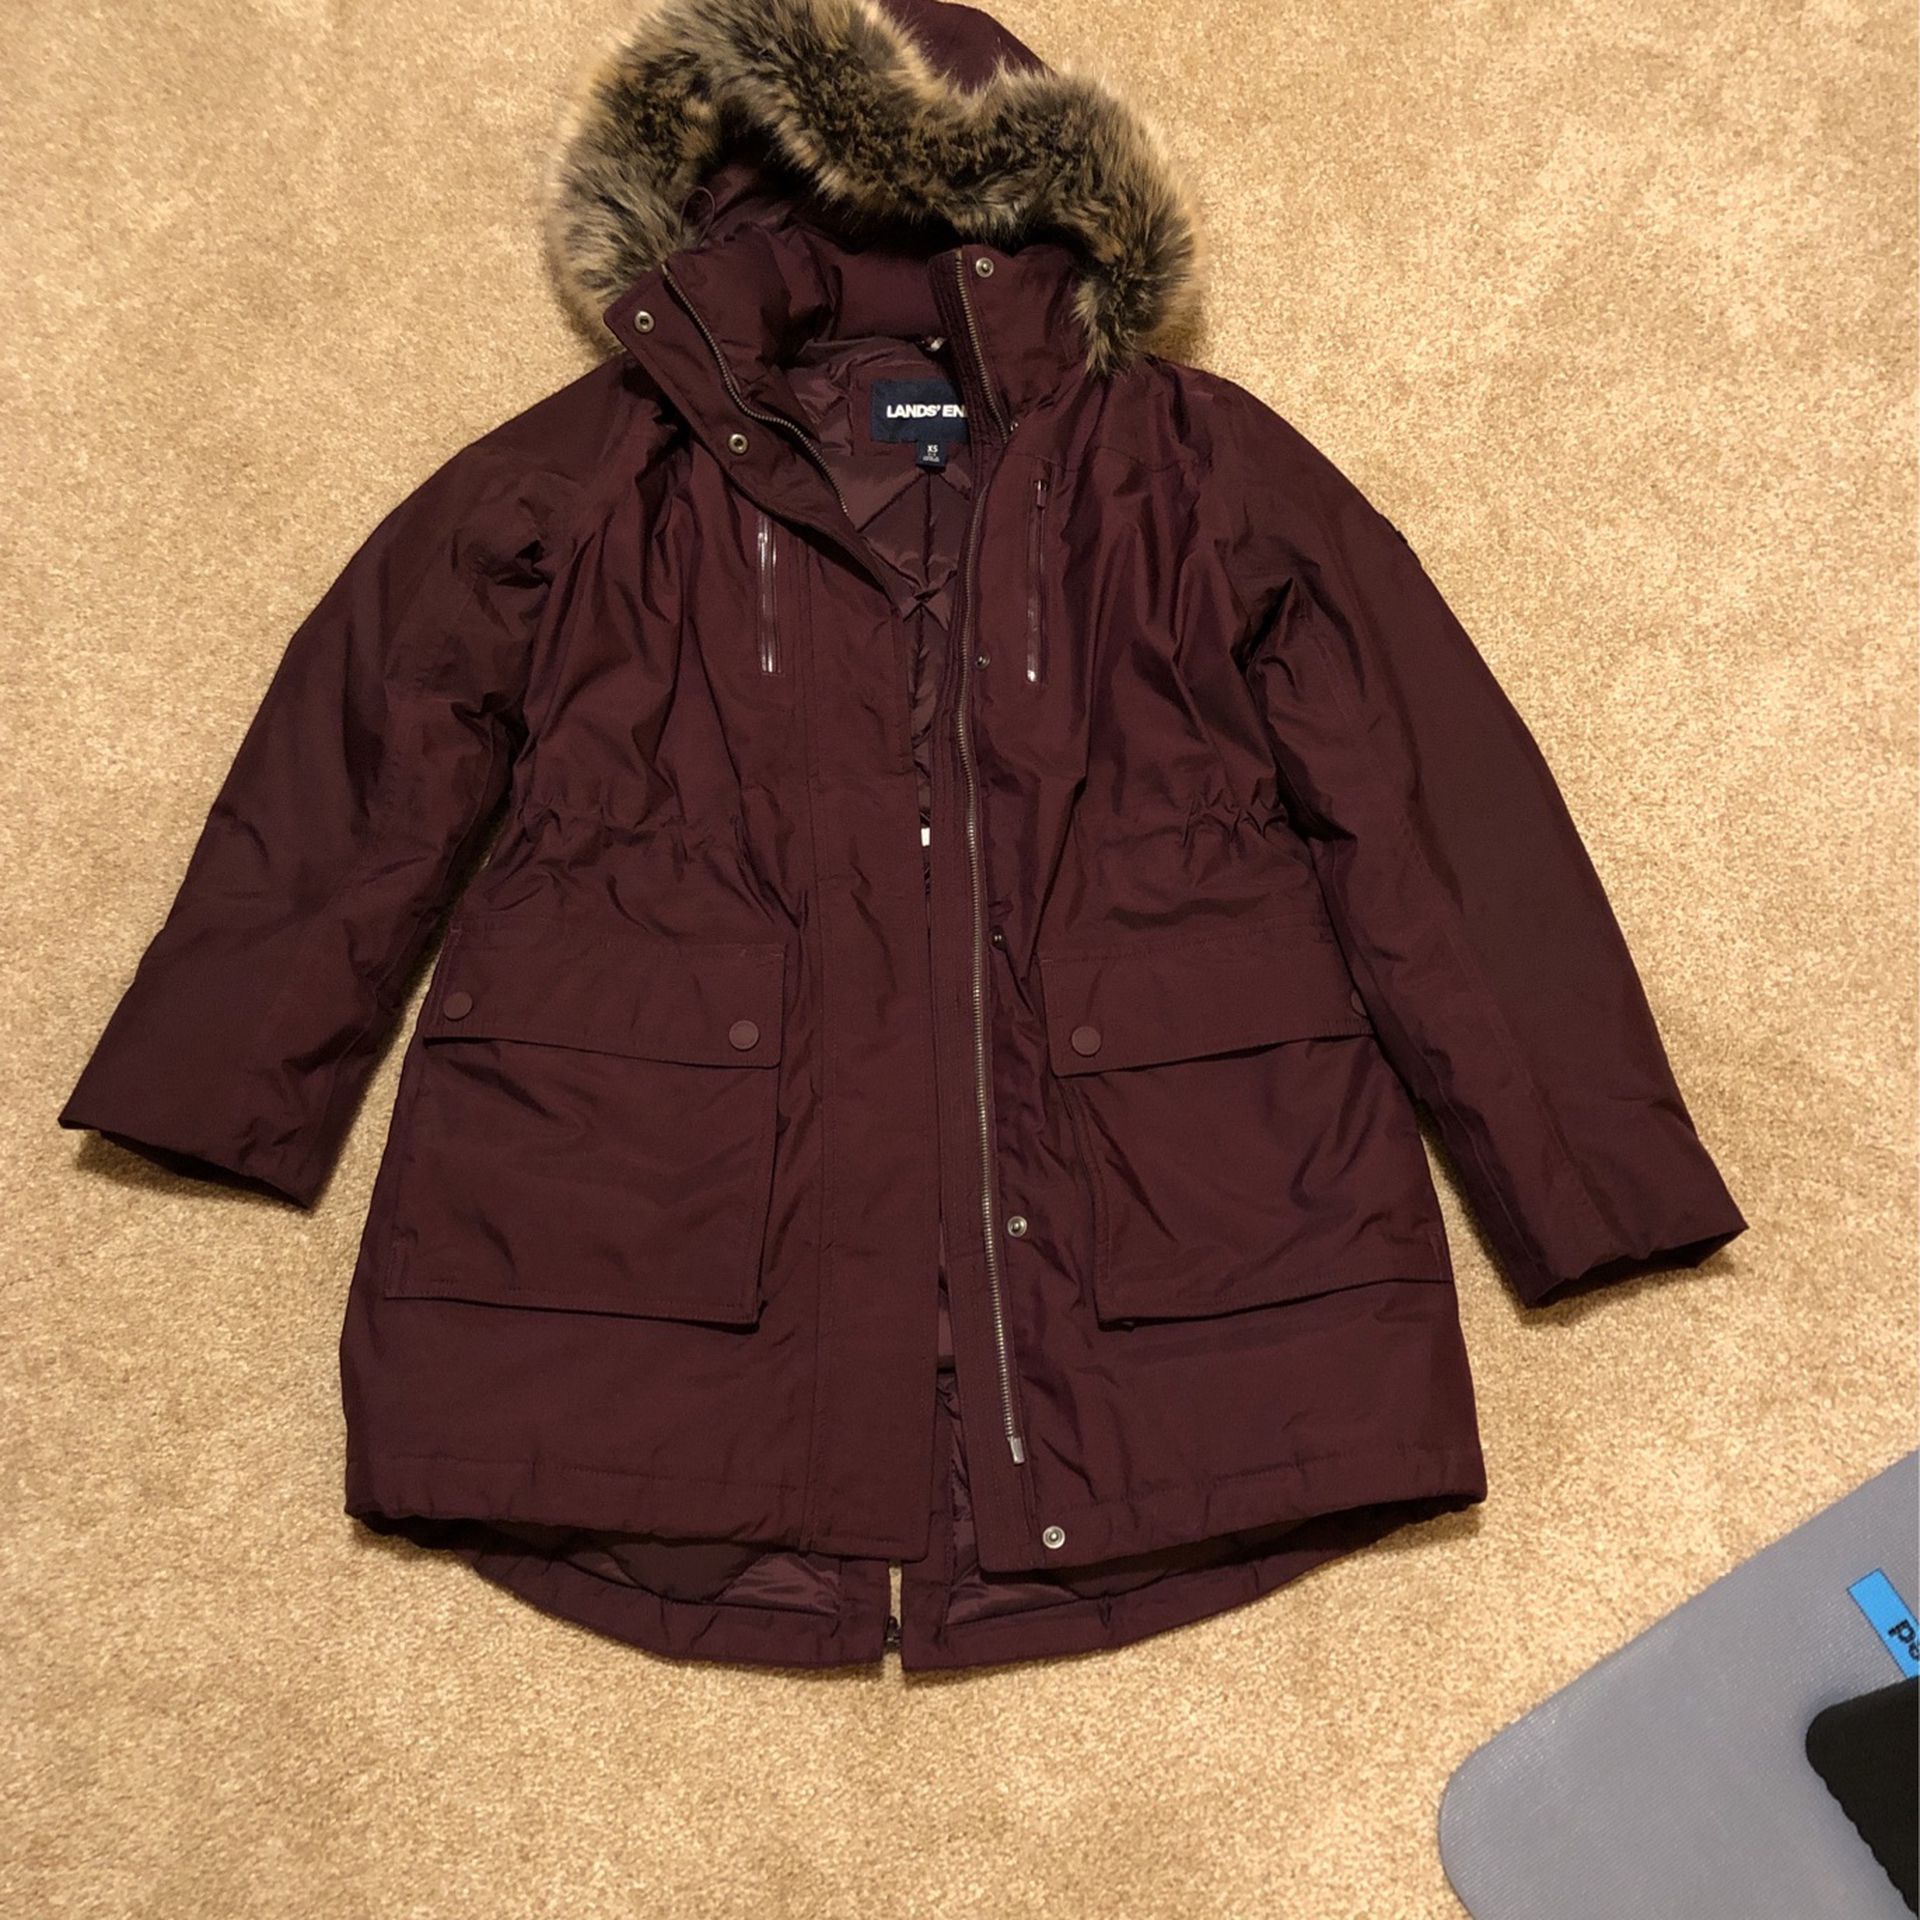 Land’s End Women’s Expedition Waterproof Down Winter Parka With Faux Fur Hood Mulberry Color,